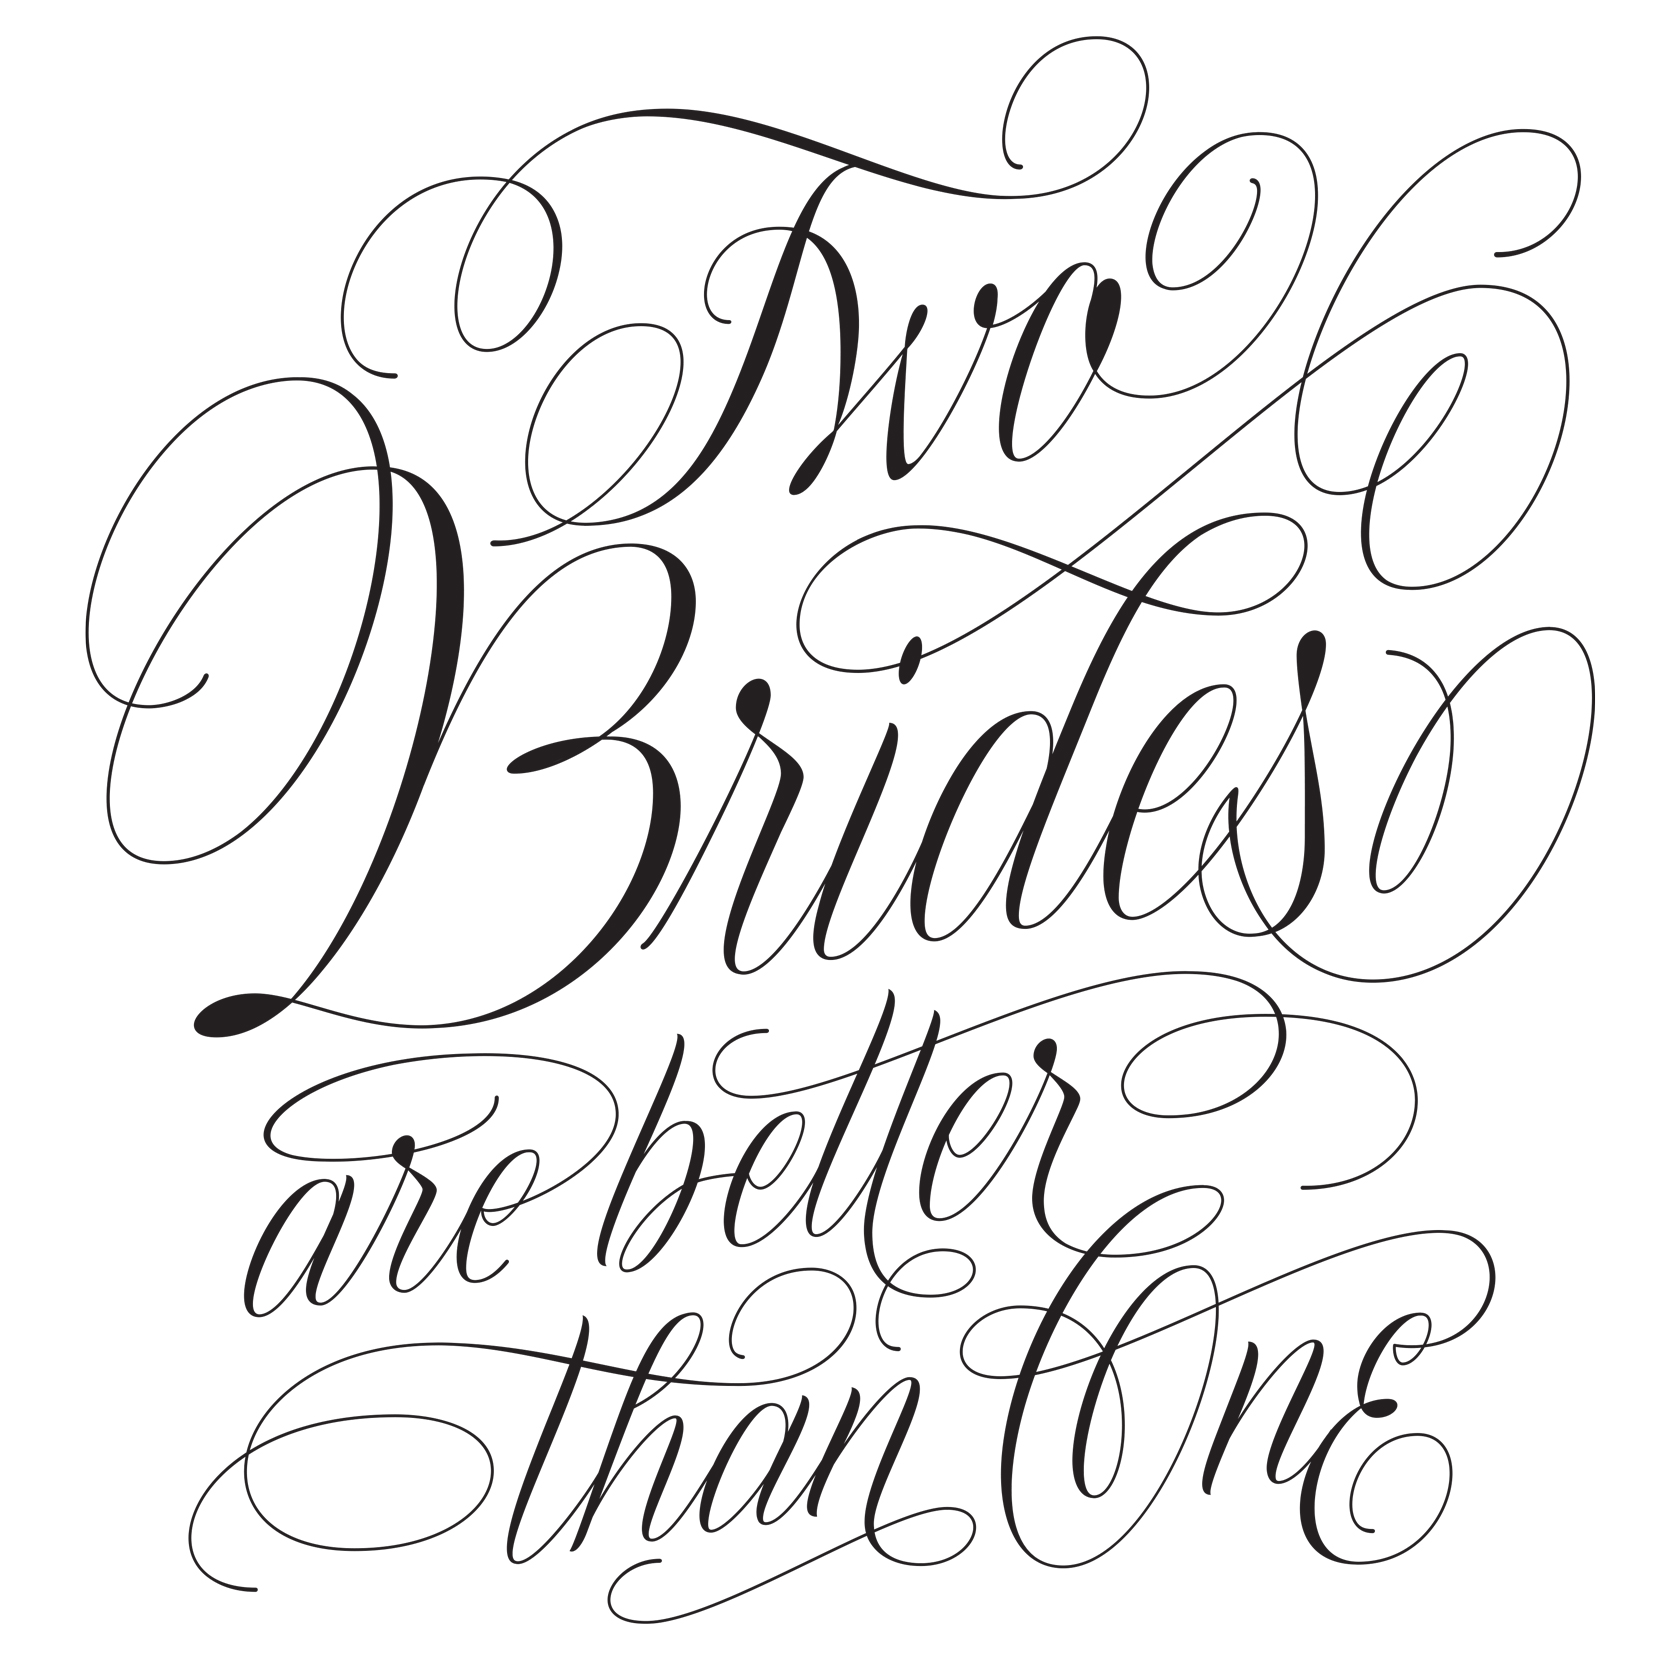 Martina Flor Papyrus Two brides are better than one